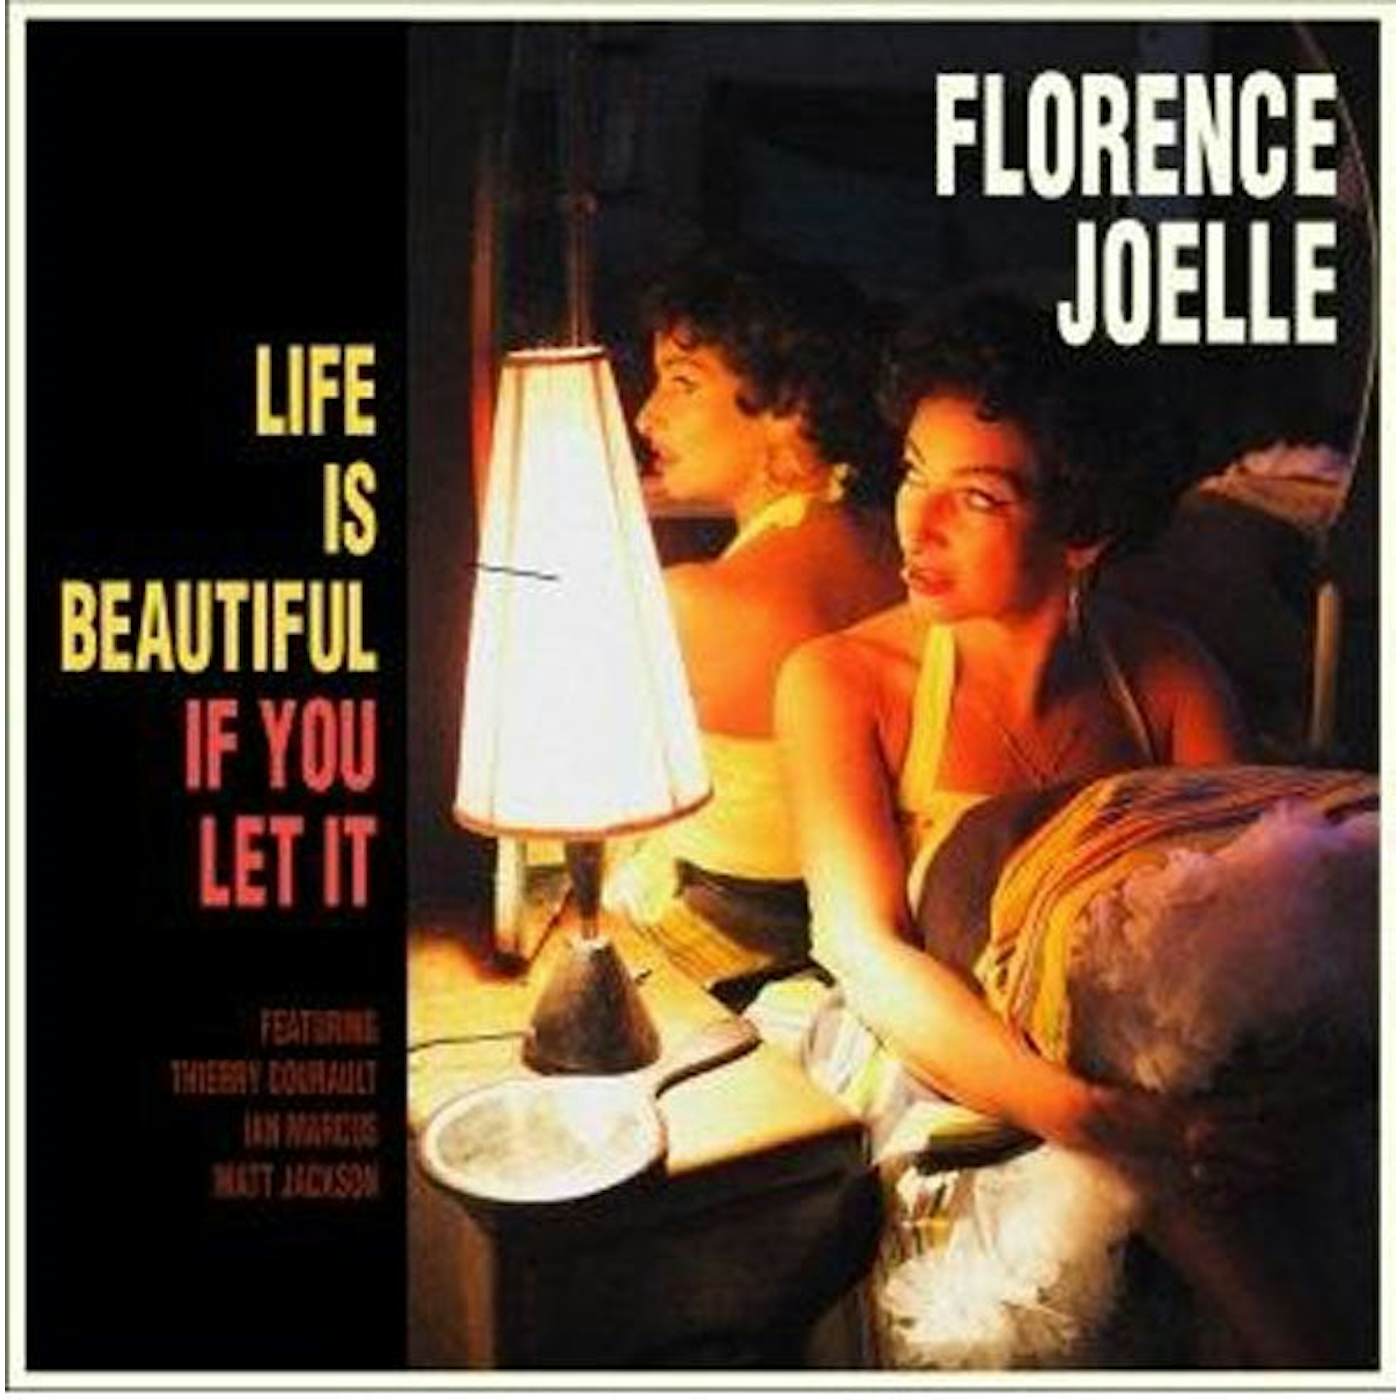  Florence Joelle LP - Life Is Beautiful If You Let It (Vinyl)